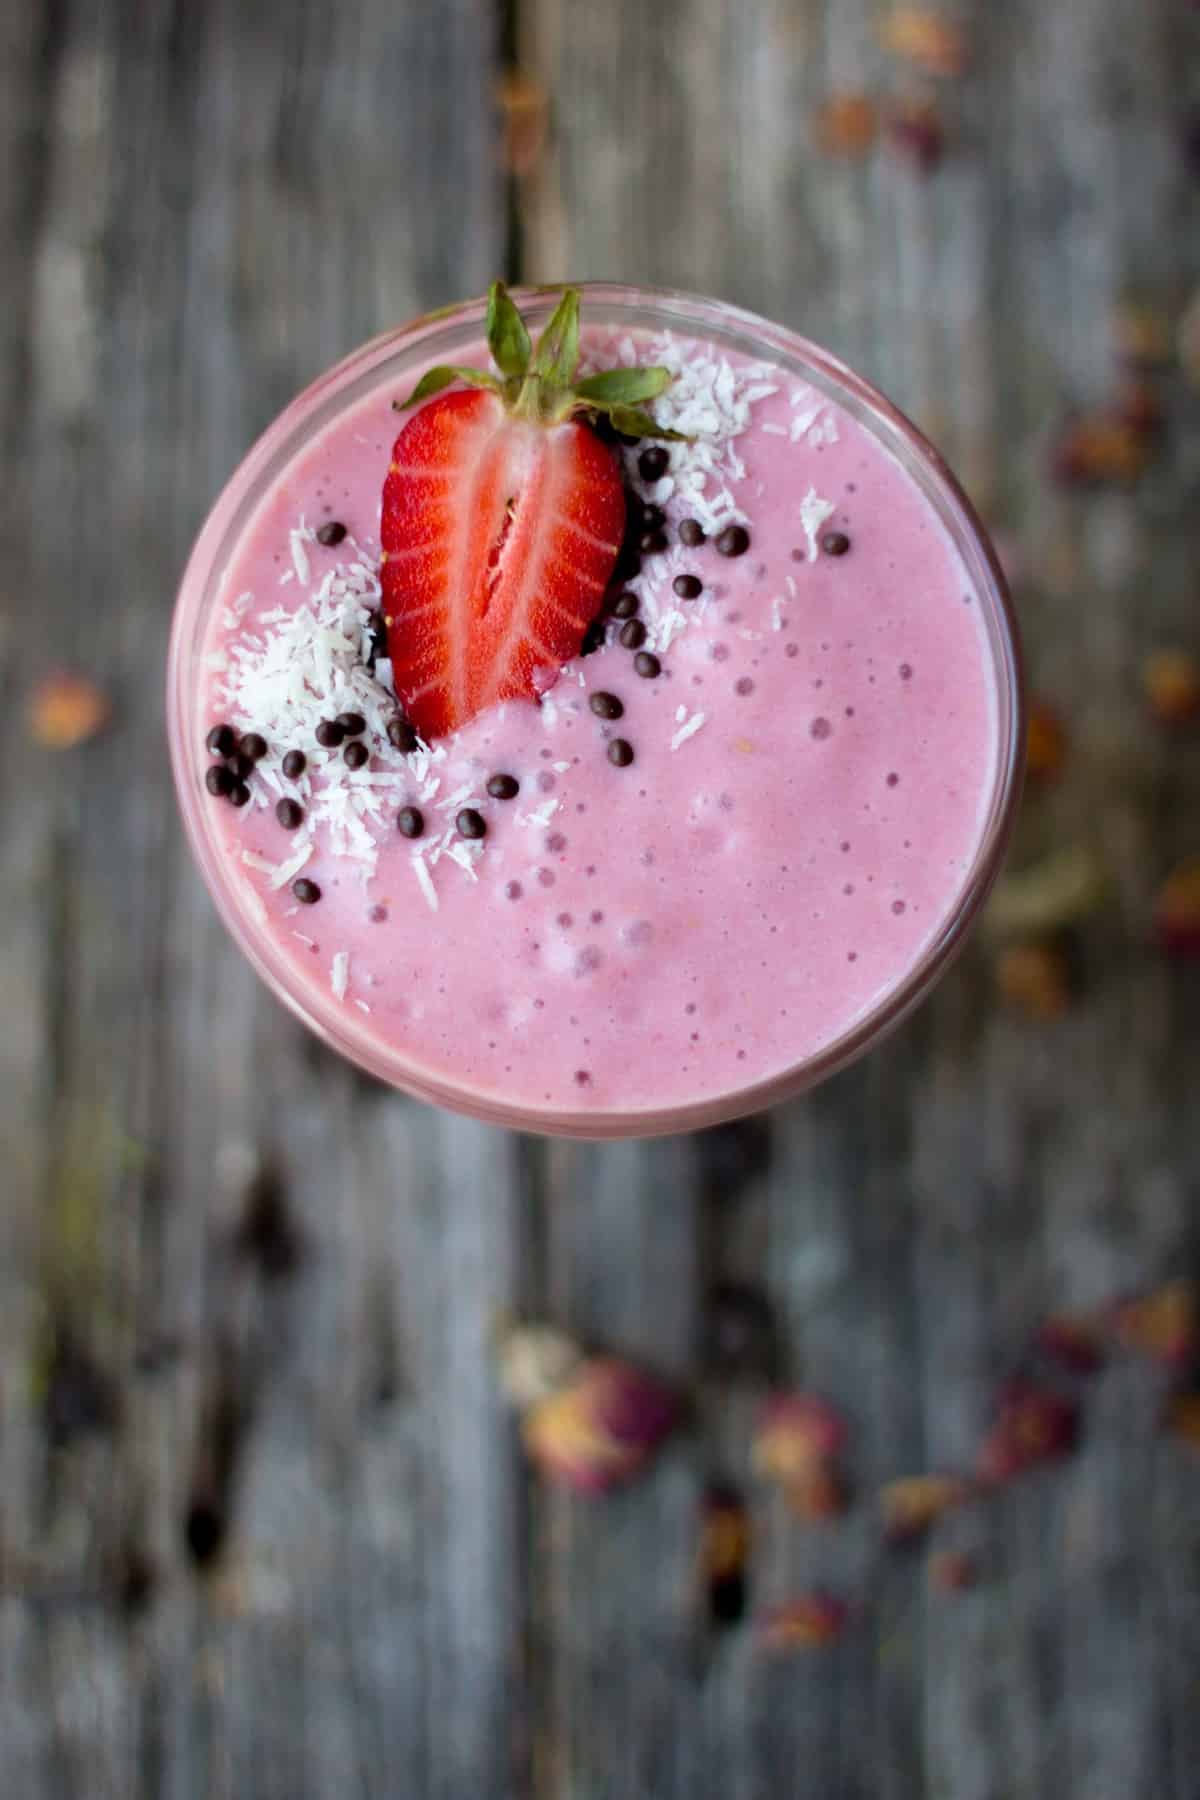 Rose ‘n Berry Smoothie by @beardandbonnet on www.thismessisours.com